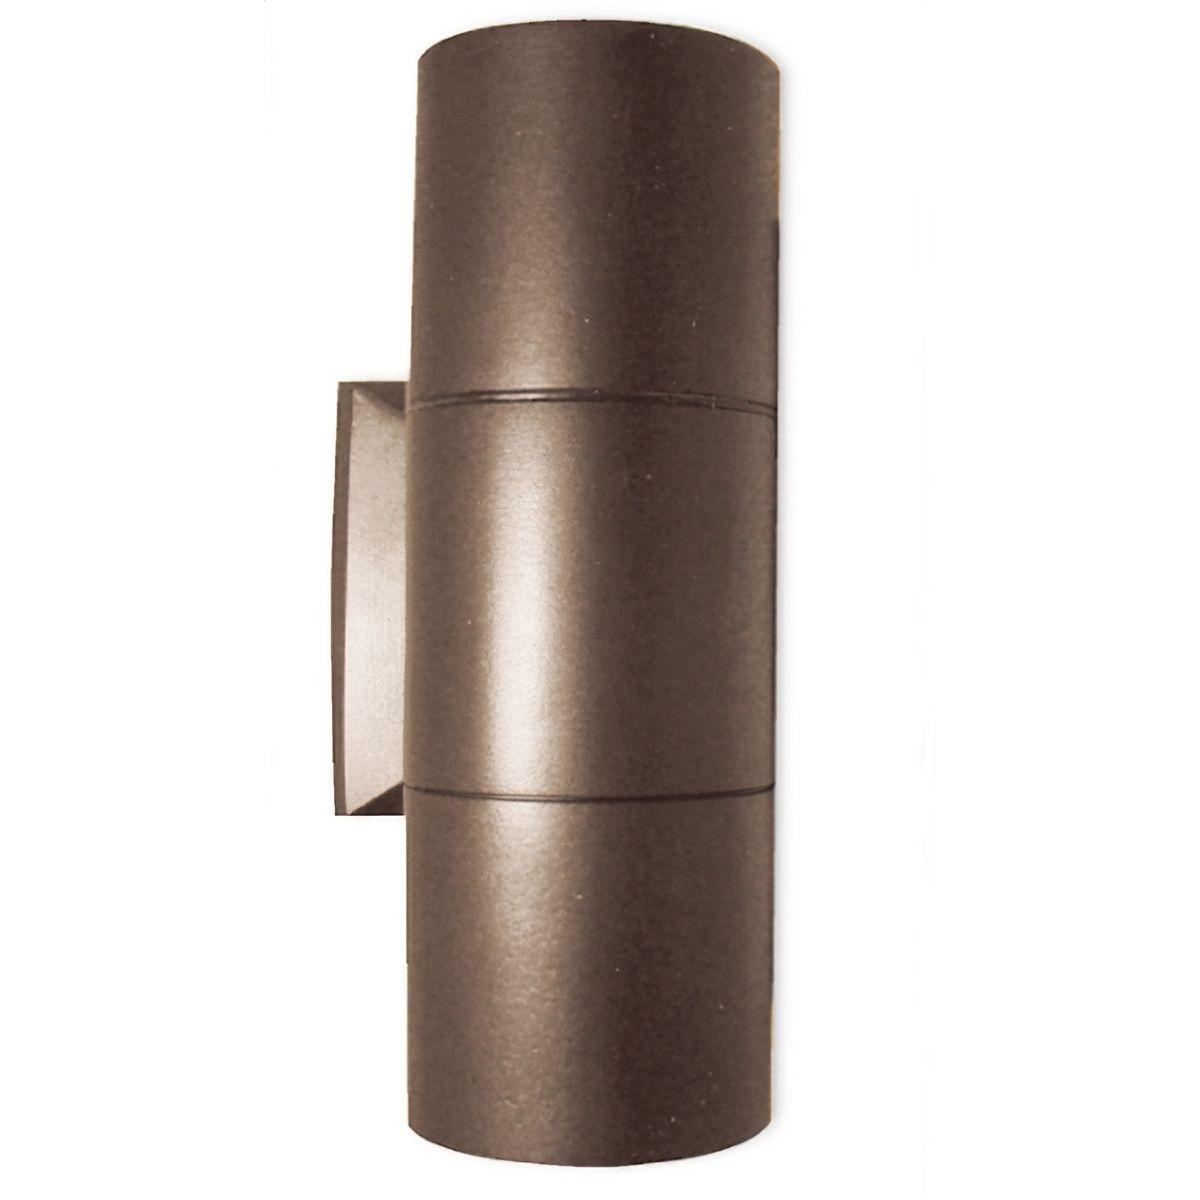 5 In 2 Lights Outdoor Cylinder Up/Down Wall Light Bronze Finish